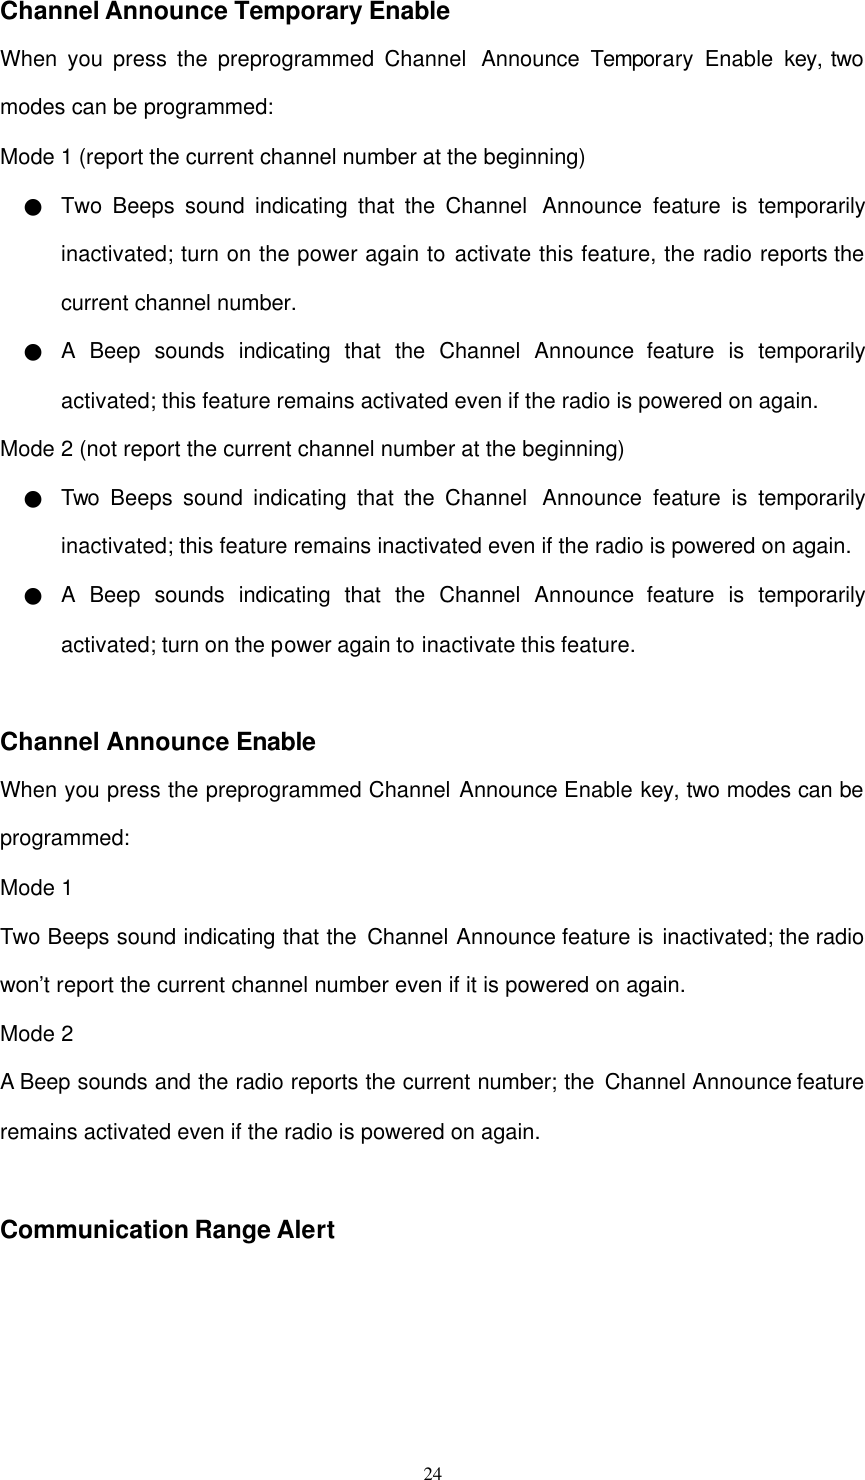  24 Channel Announce Temporary Enable When you press the preprogrammed Channel  Announce Temporary  Enable  key, two modes can be programmed: Mode 1 (report the current channel number at the beginning) ●　 Two Beeps sound indicating that the Channel  Announce feature is temporarily inactivated; turn on the power again to activate this feature, the radio reports the current channel number. ●　 A Beep sounds indicating that the Channel Announce feature is temporarily activated; this feature remains activated even if the radio is powered on again. Mode 2 (not report the current channel number at the beginning) ●　 Two Beeps sound indicating that the Channel  Announce feature is temporarily inactivated; this feature remains inactivated even if the radio is powered on again. ●　 A Beep sounds indicating that the Channel Announce feature is temporarily activated; turn on the power again to inactivate this feature.  Channel Announce Enable When you press the preprogrammed Channel Announce Enable key, two modes can be programmed: Mode 1 Two Beeps sound indicating that the Channel Announce feature is inactivated; the radio won’t report the current channel number even if it is powered on again. Mode 2 A Beep sounds and the radio reports the current number; the Channel Announce feature remains activated even if the radio is powered on again.  Communication Range Alert     